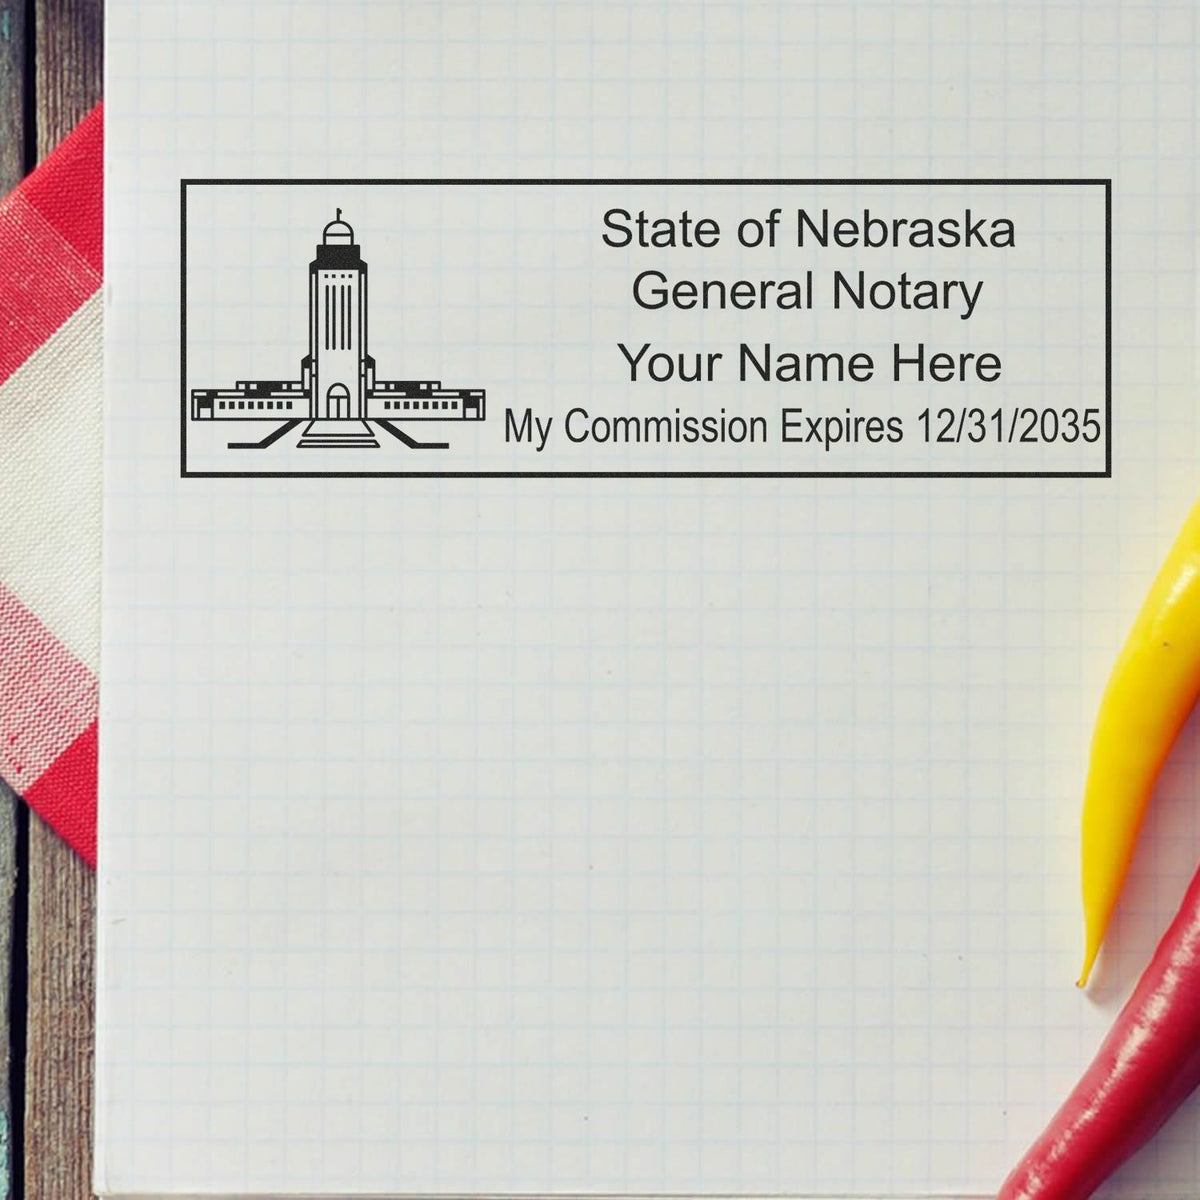 A lifestyle photo showing a stamped image of the Heavy-Duty Nebraska Rectangular Notary Stamp on a piece of paper